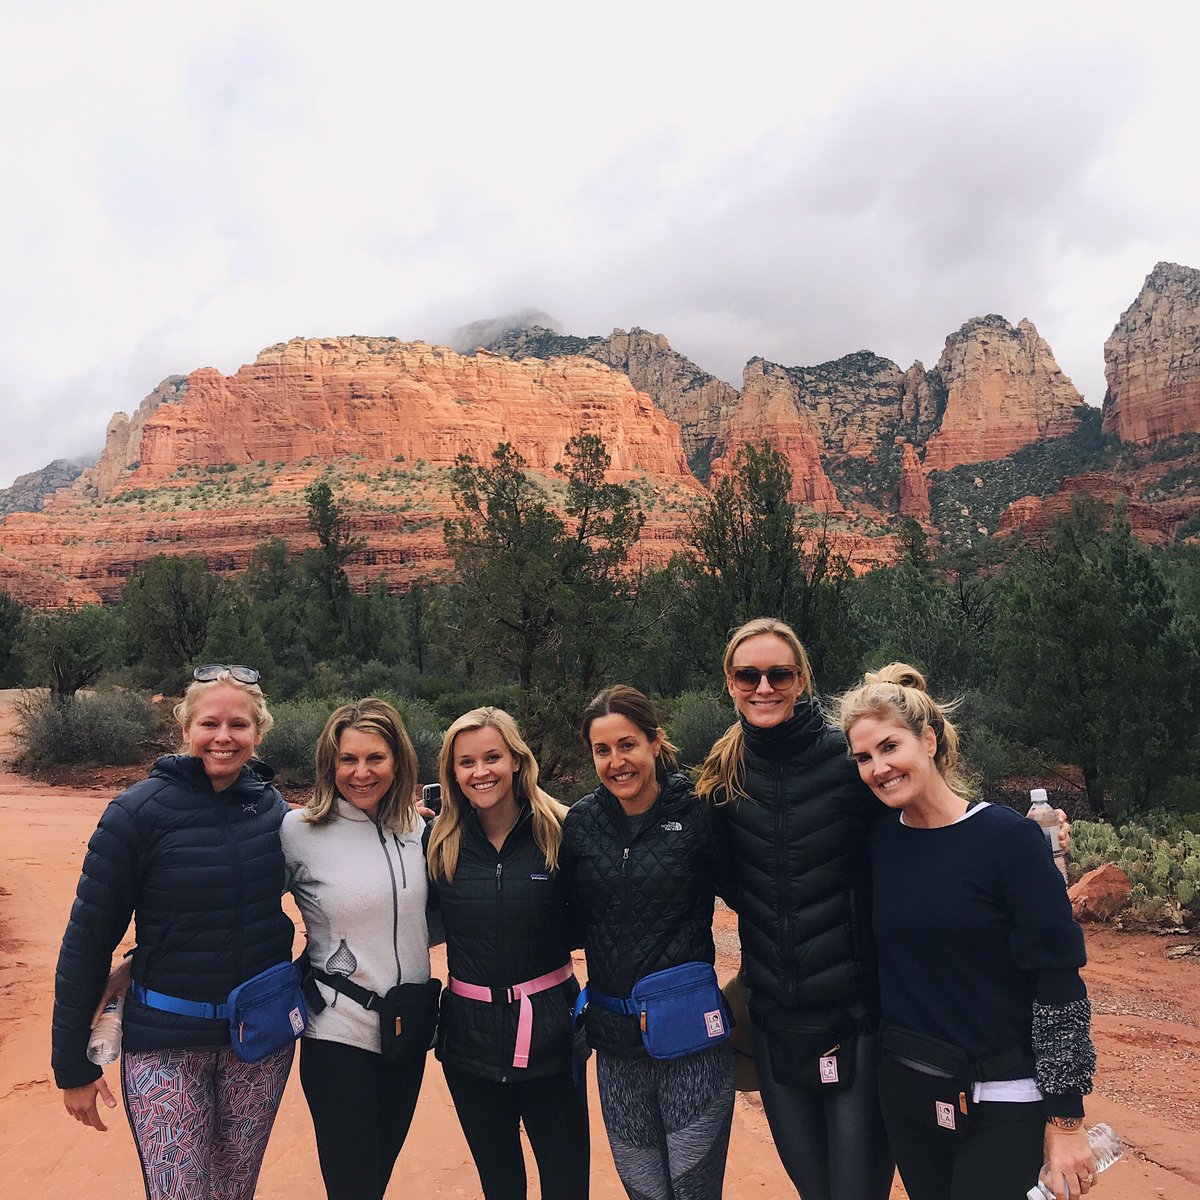 What a treat to get away in nature with my girls! #Sedona #GirlsTrip ???? https://t.co/BciZXTEwC6